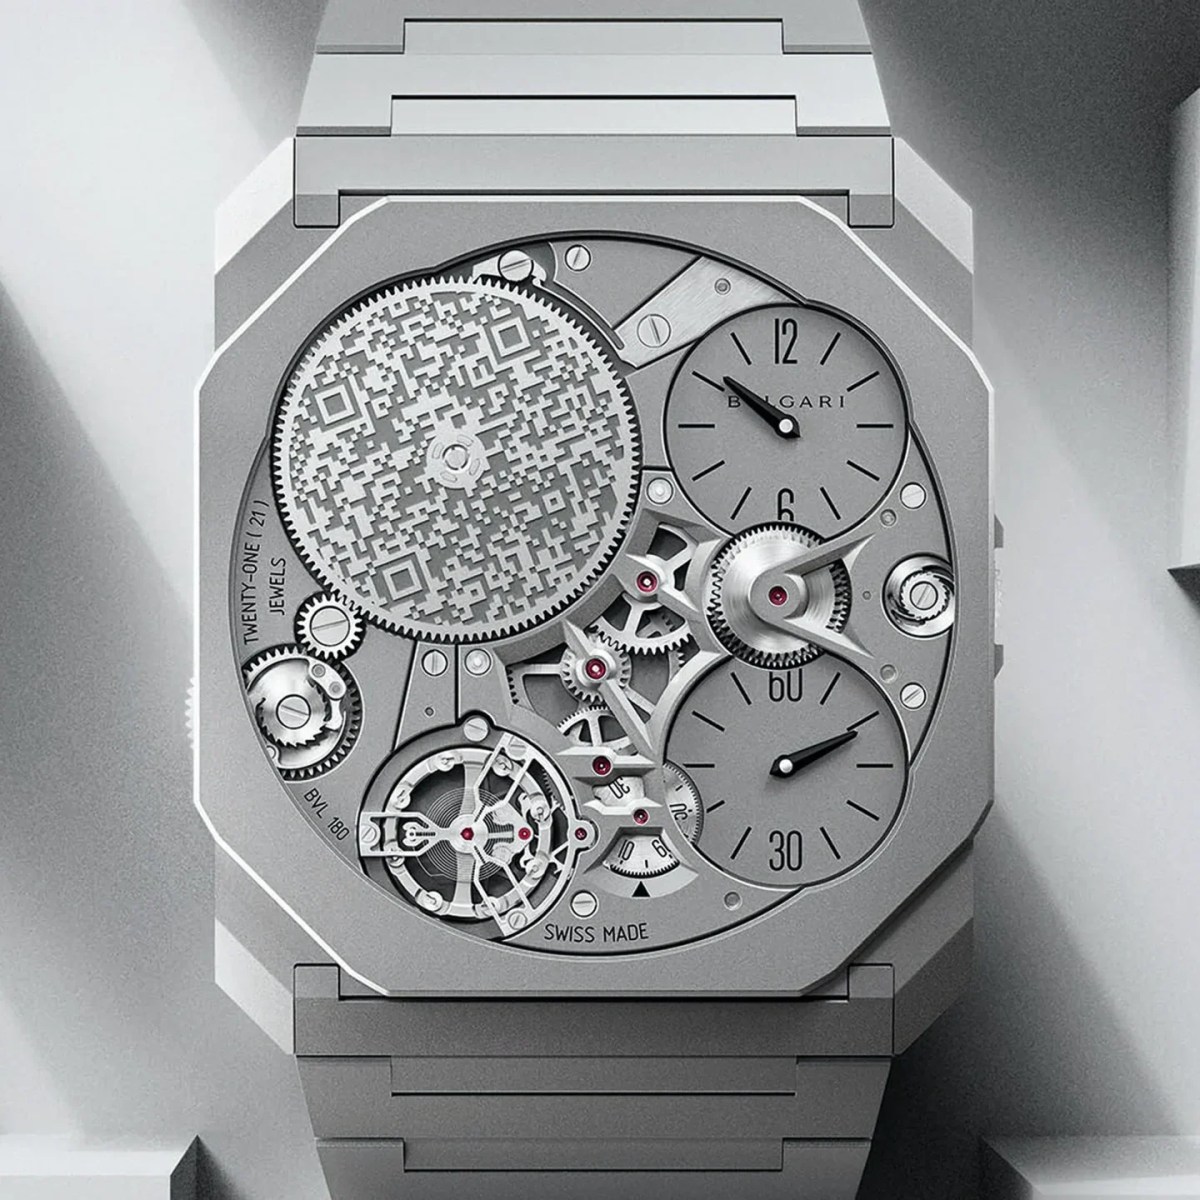 Bulgari’s Octo Finissimo Ultra Sets Record for World’s Thinnest Watch – COOL HUNTING®